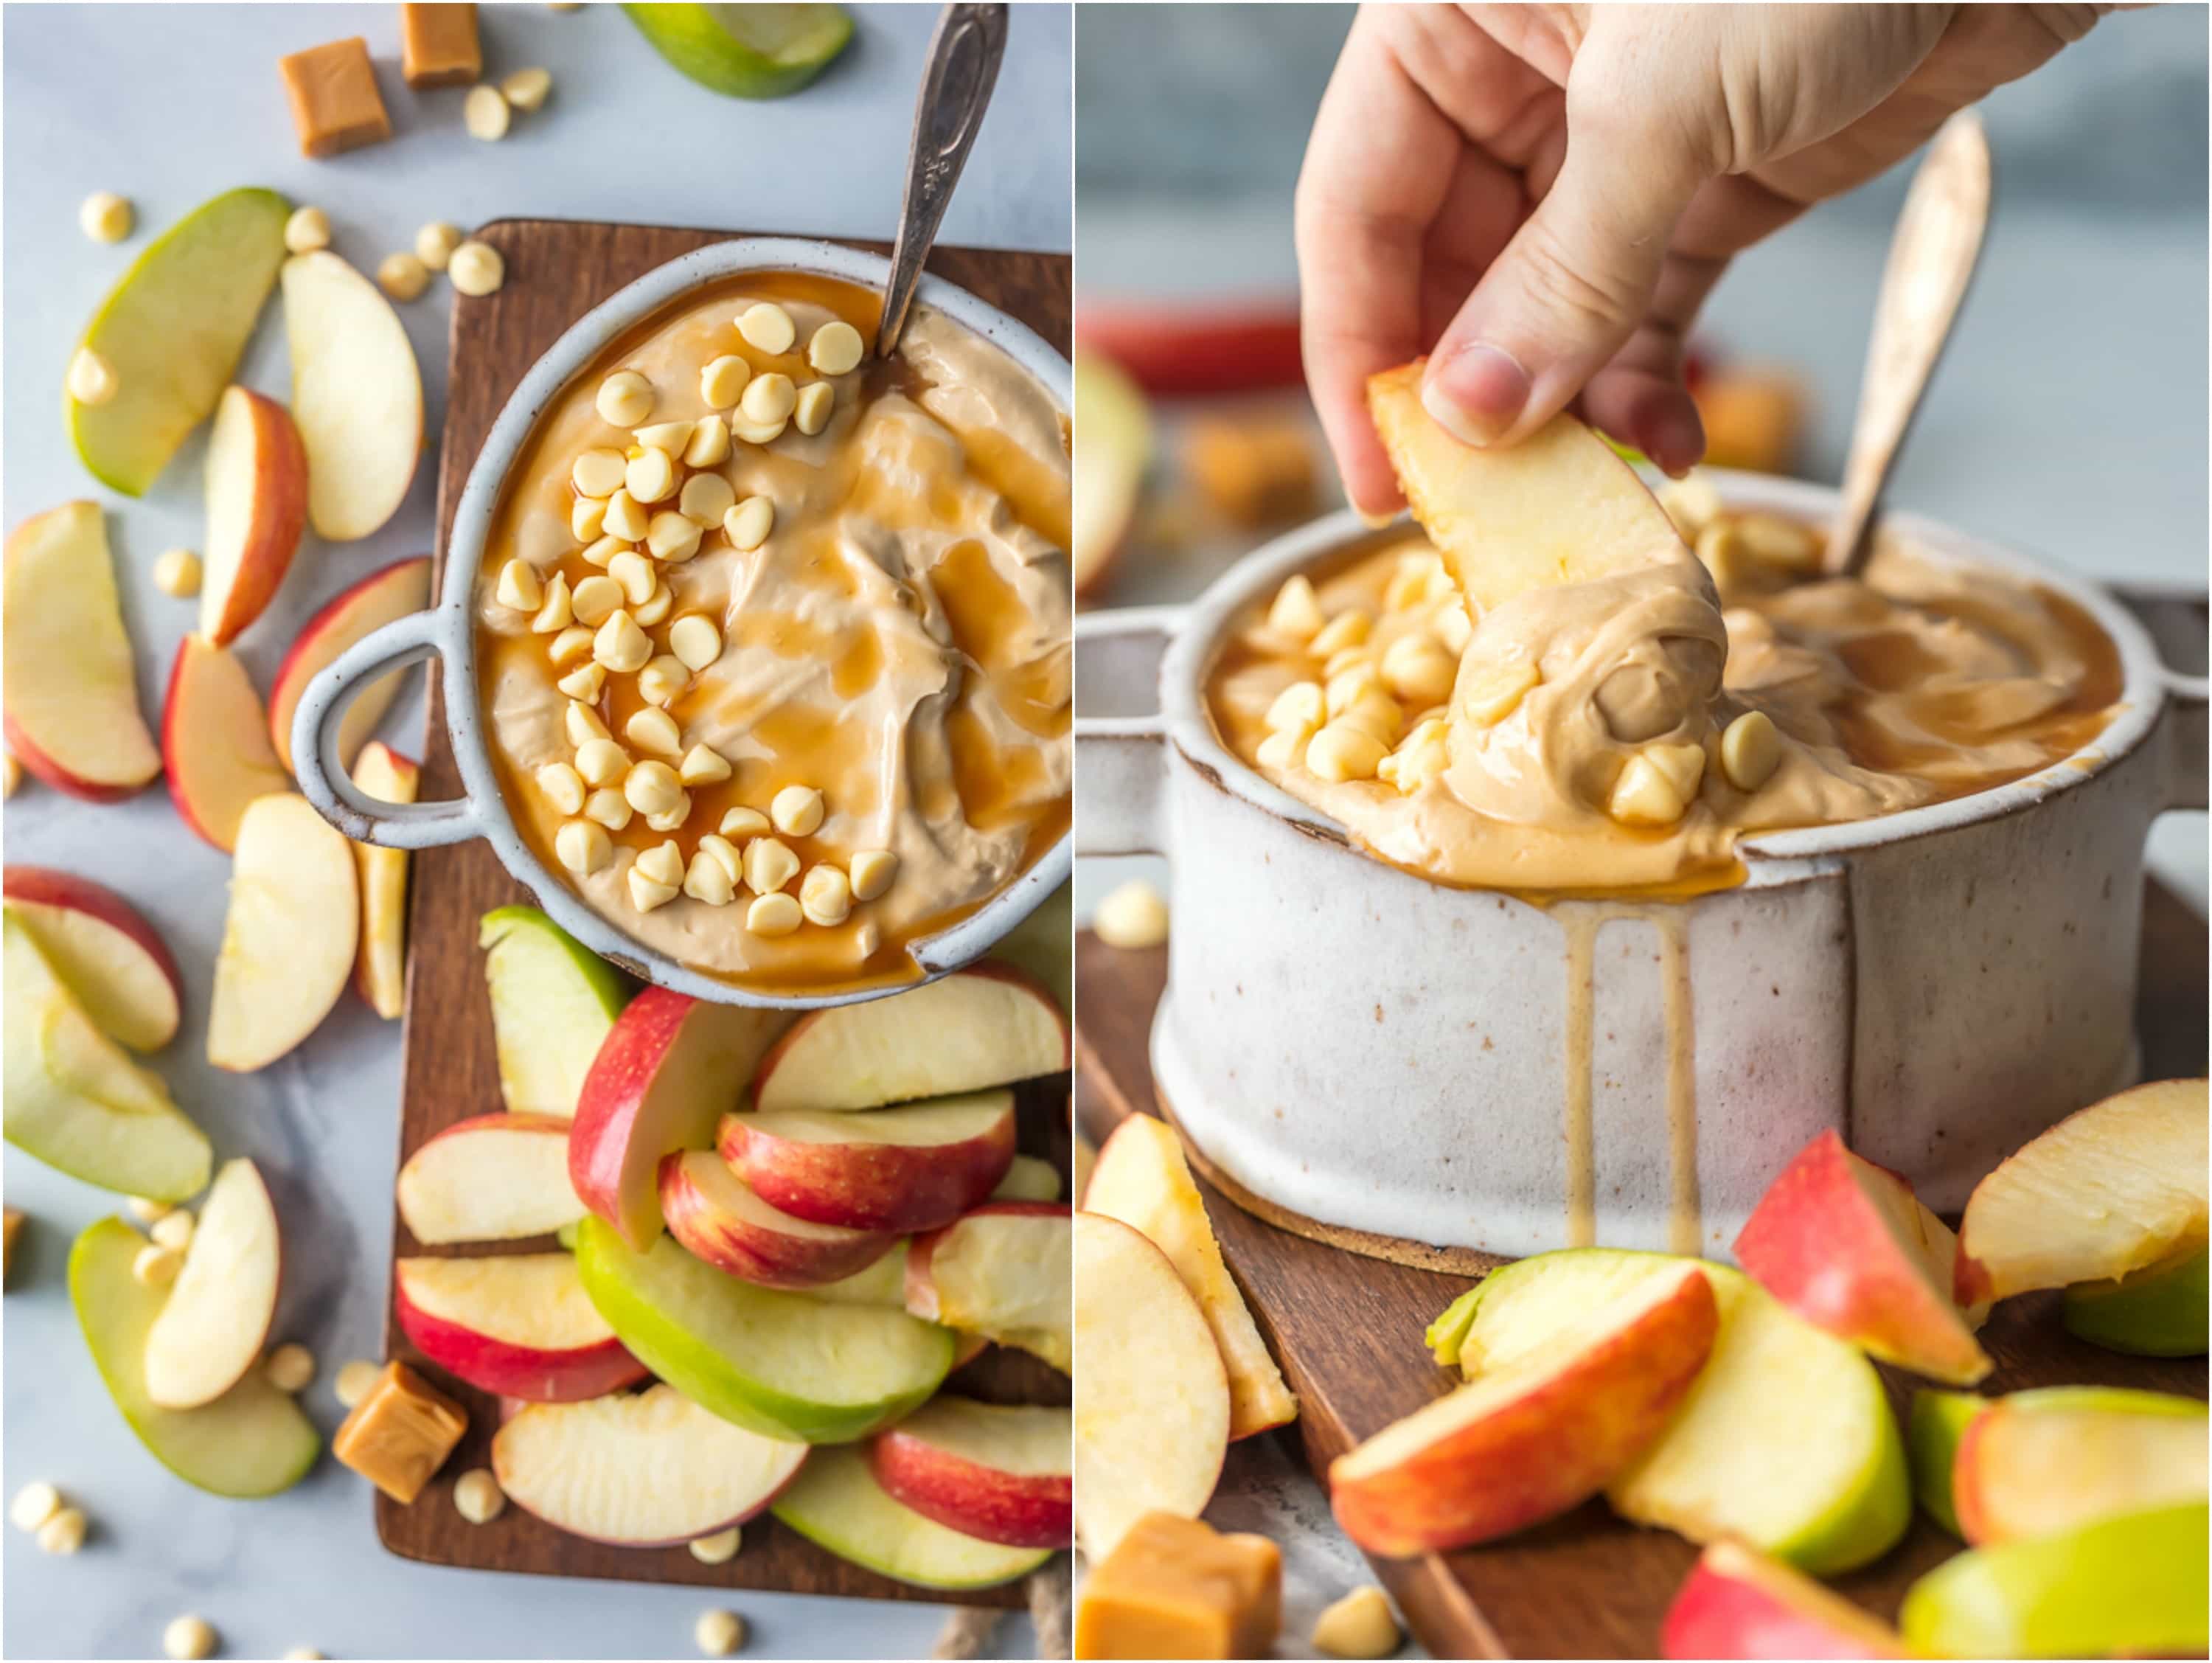 Every Fall party needs SKINNY CARAMEL APPLE DIP! This lightened up version of our favorite sweet snack is gone in minutes every time.